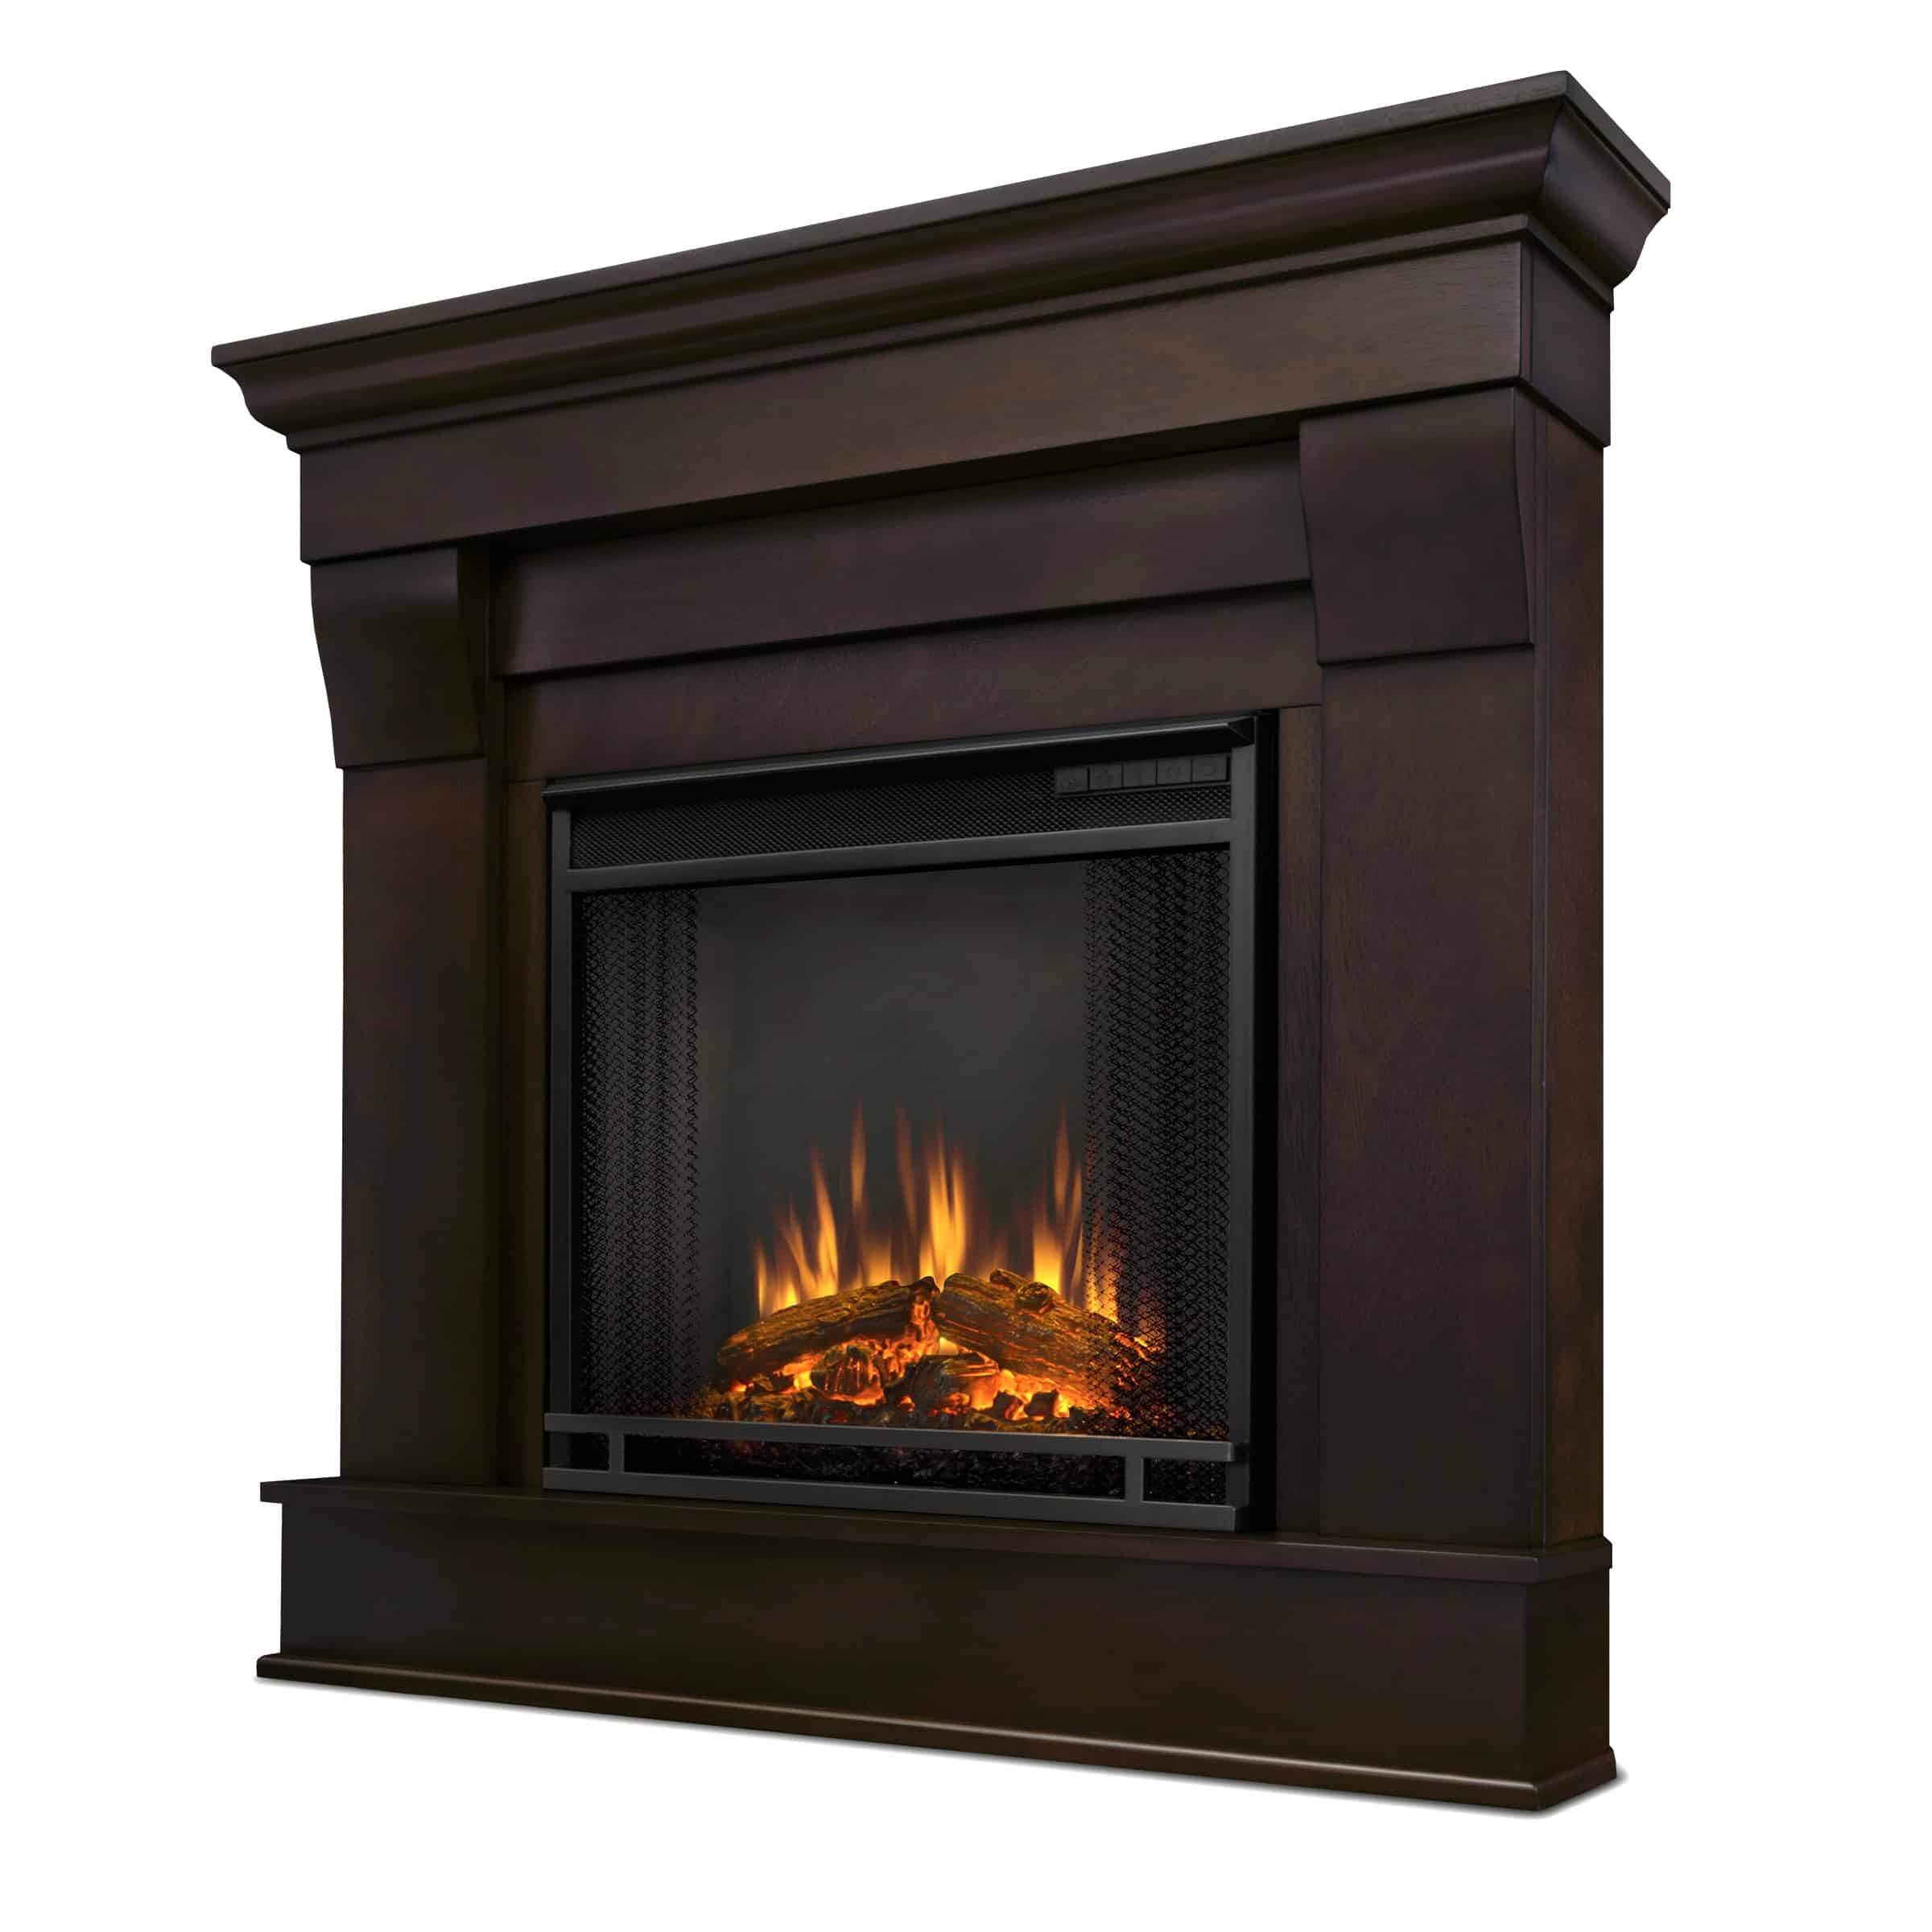 Live Edge Fireplace Mantel You Ll Love, Shanks White Corner Electric Fireplace